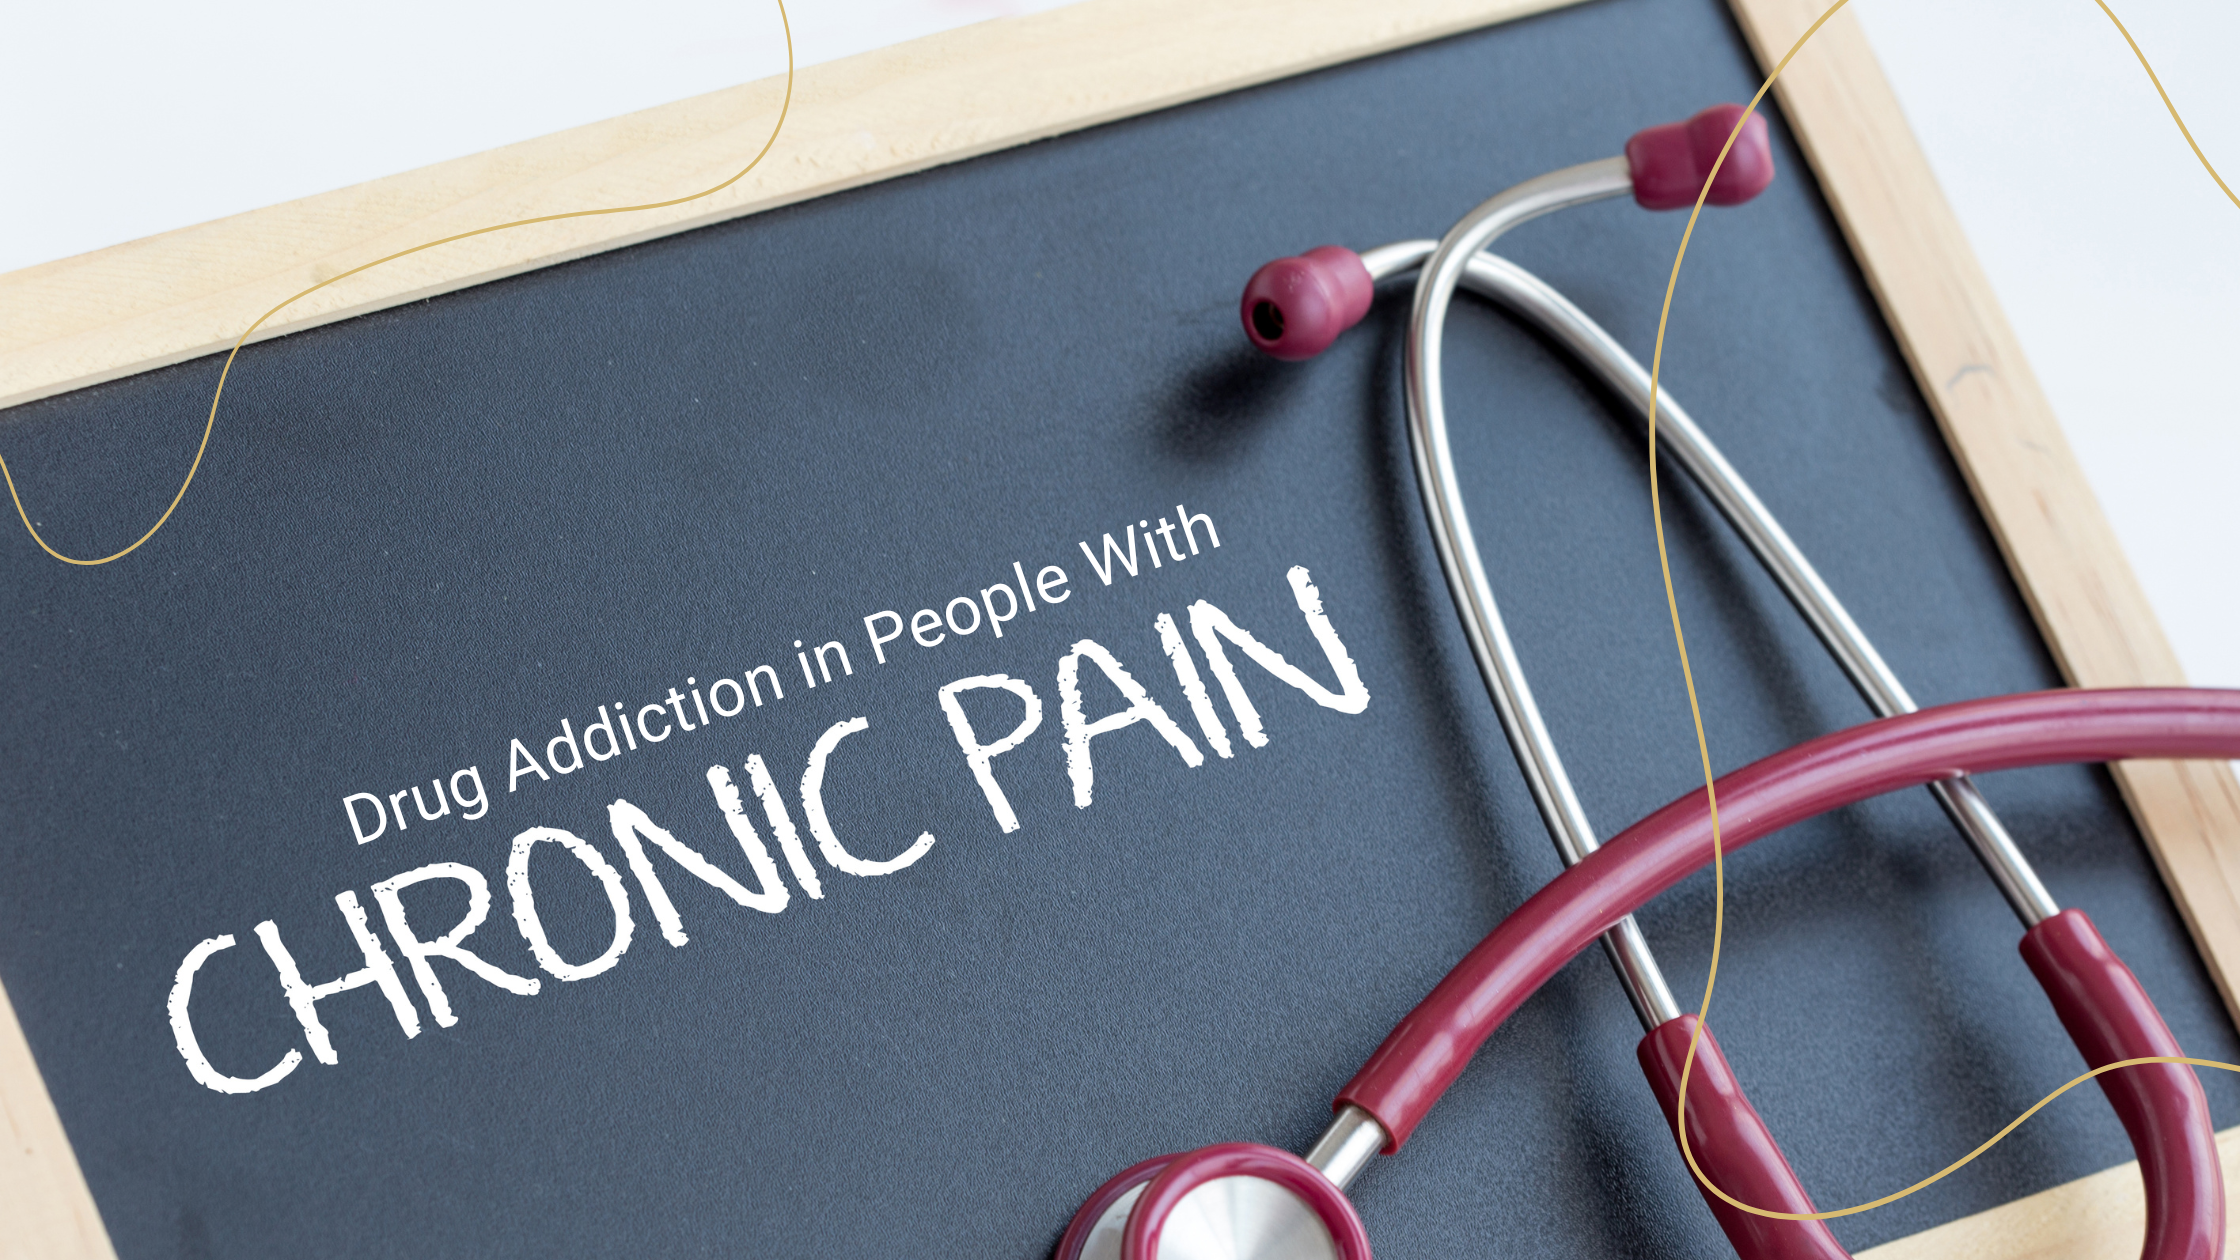 Drug Addiction in People With Chronic Pain